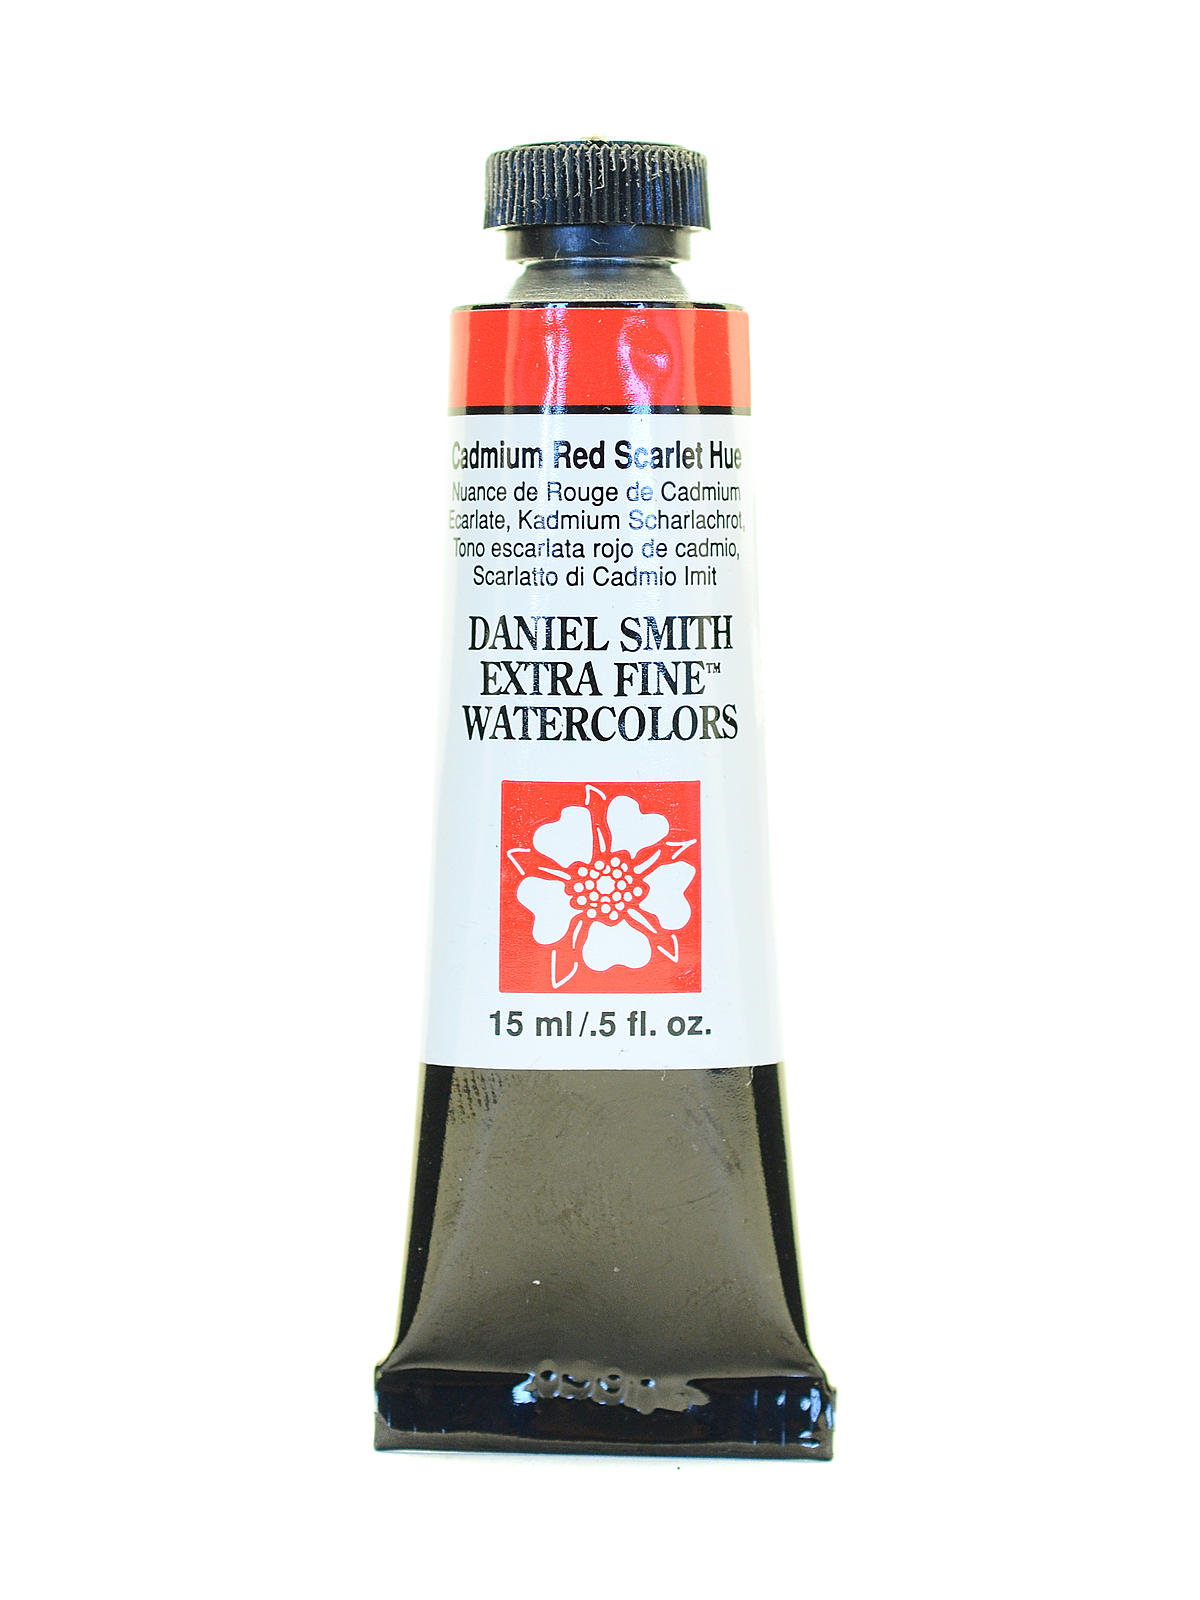 Extra Fine Watercolors Cadmium Red Scarlet Hue 15 Ml